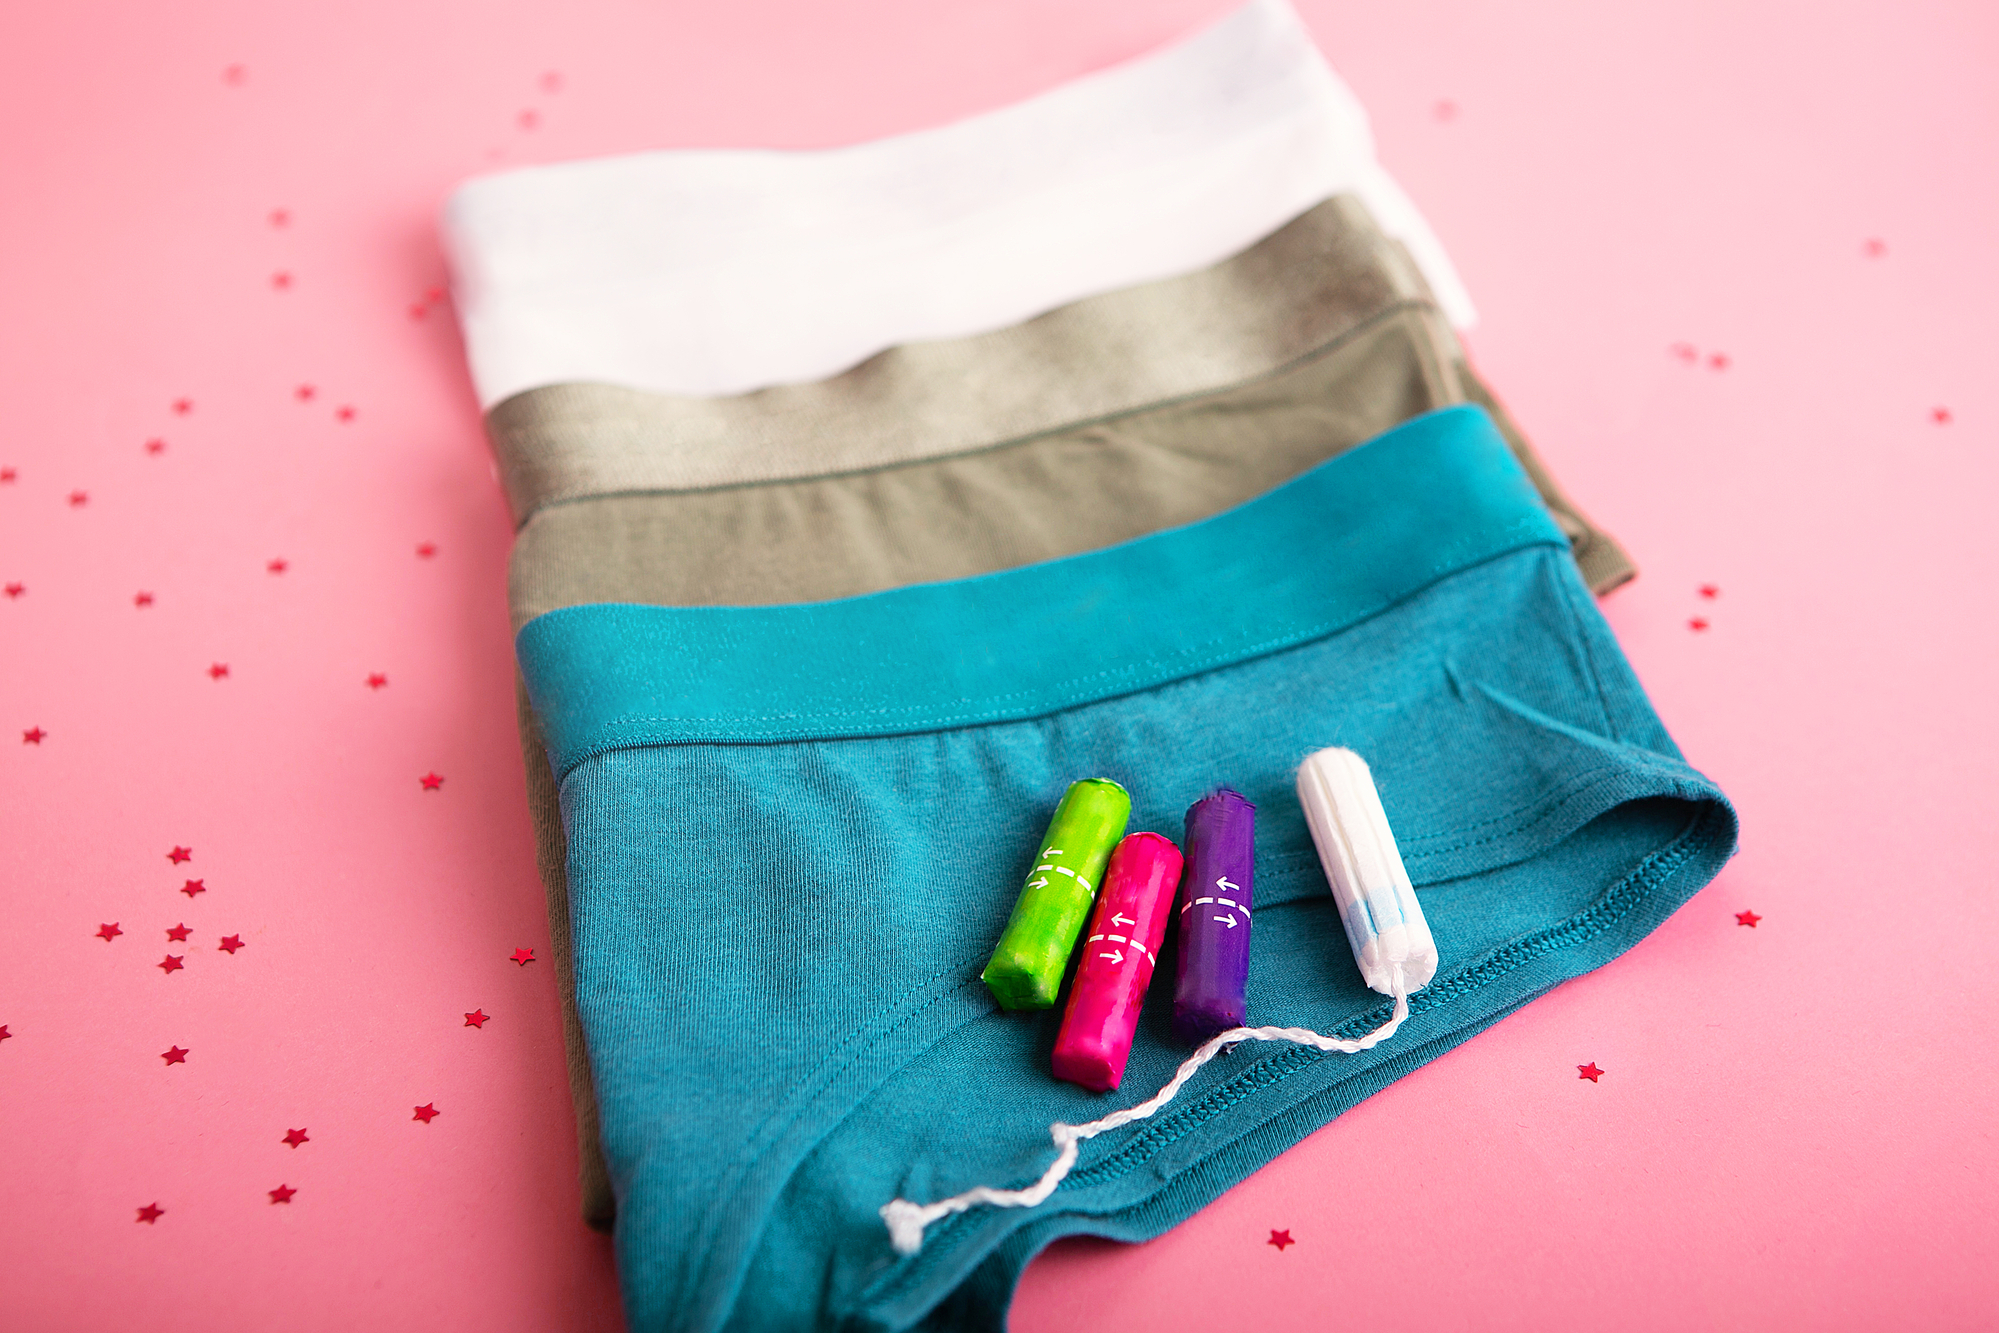 Period underwear may contain troubling chemicals—but the real